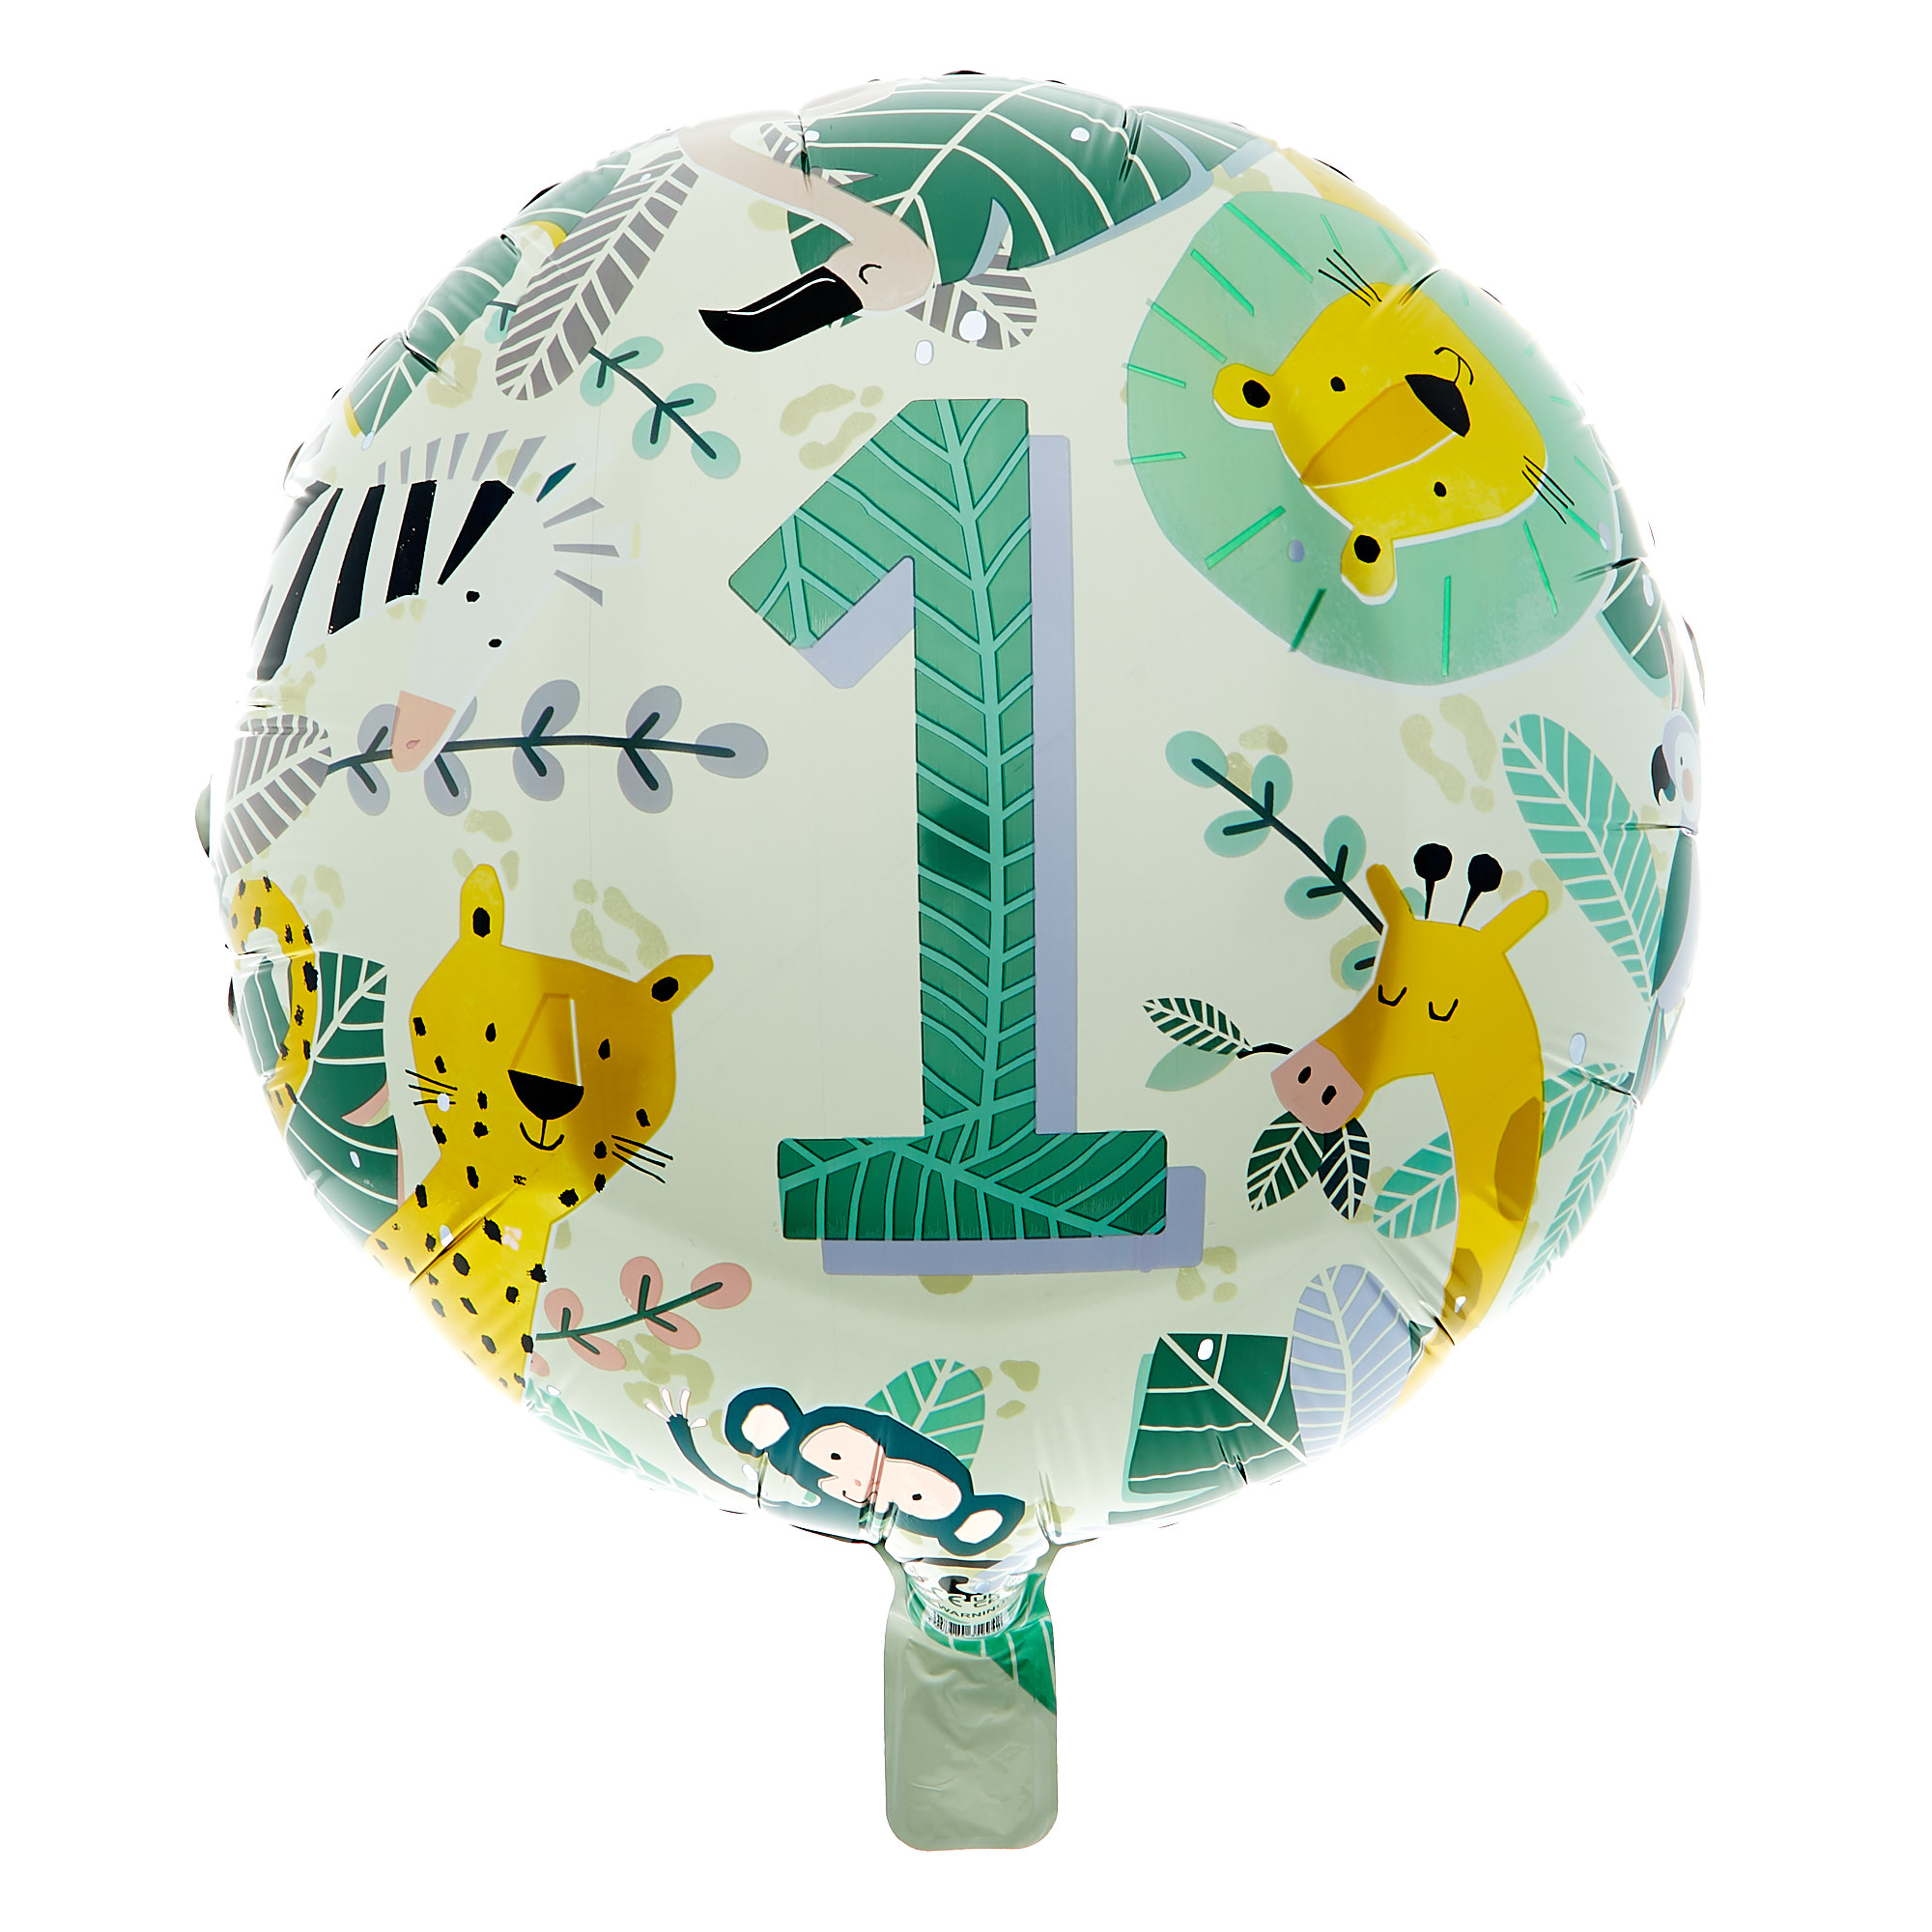 Jungle 1st Birthday Balloon Bouquet - DELIVERED INFLATED!